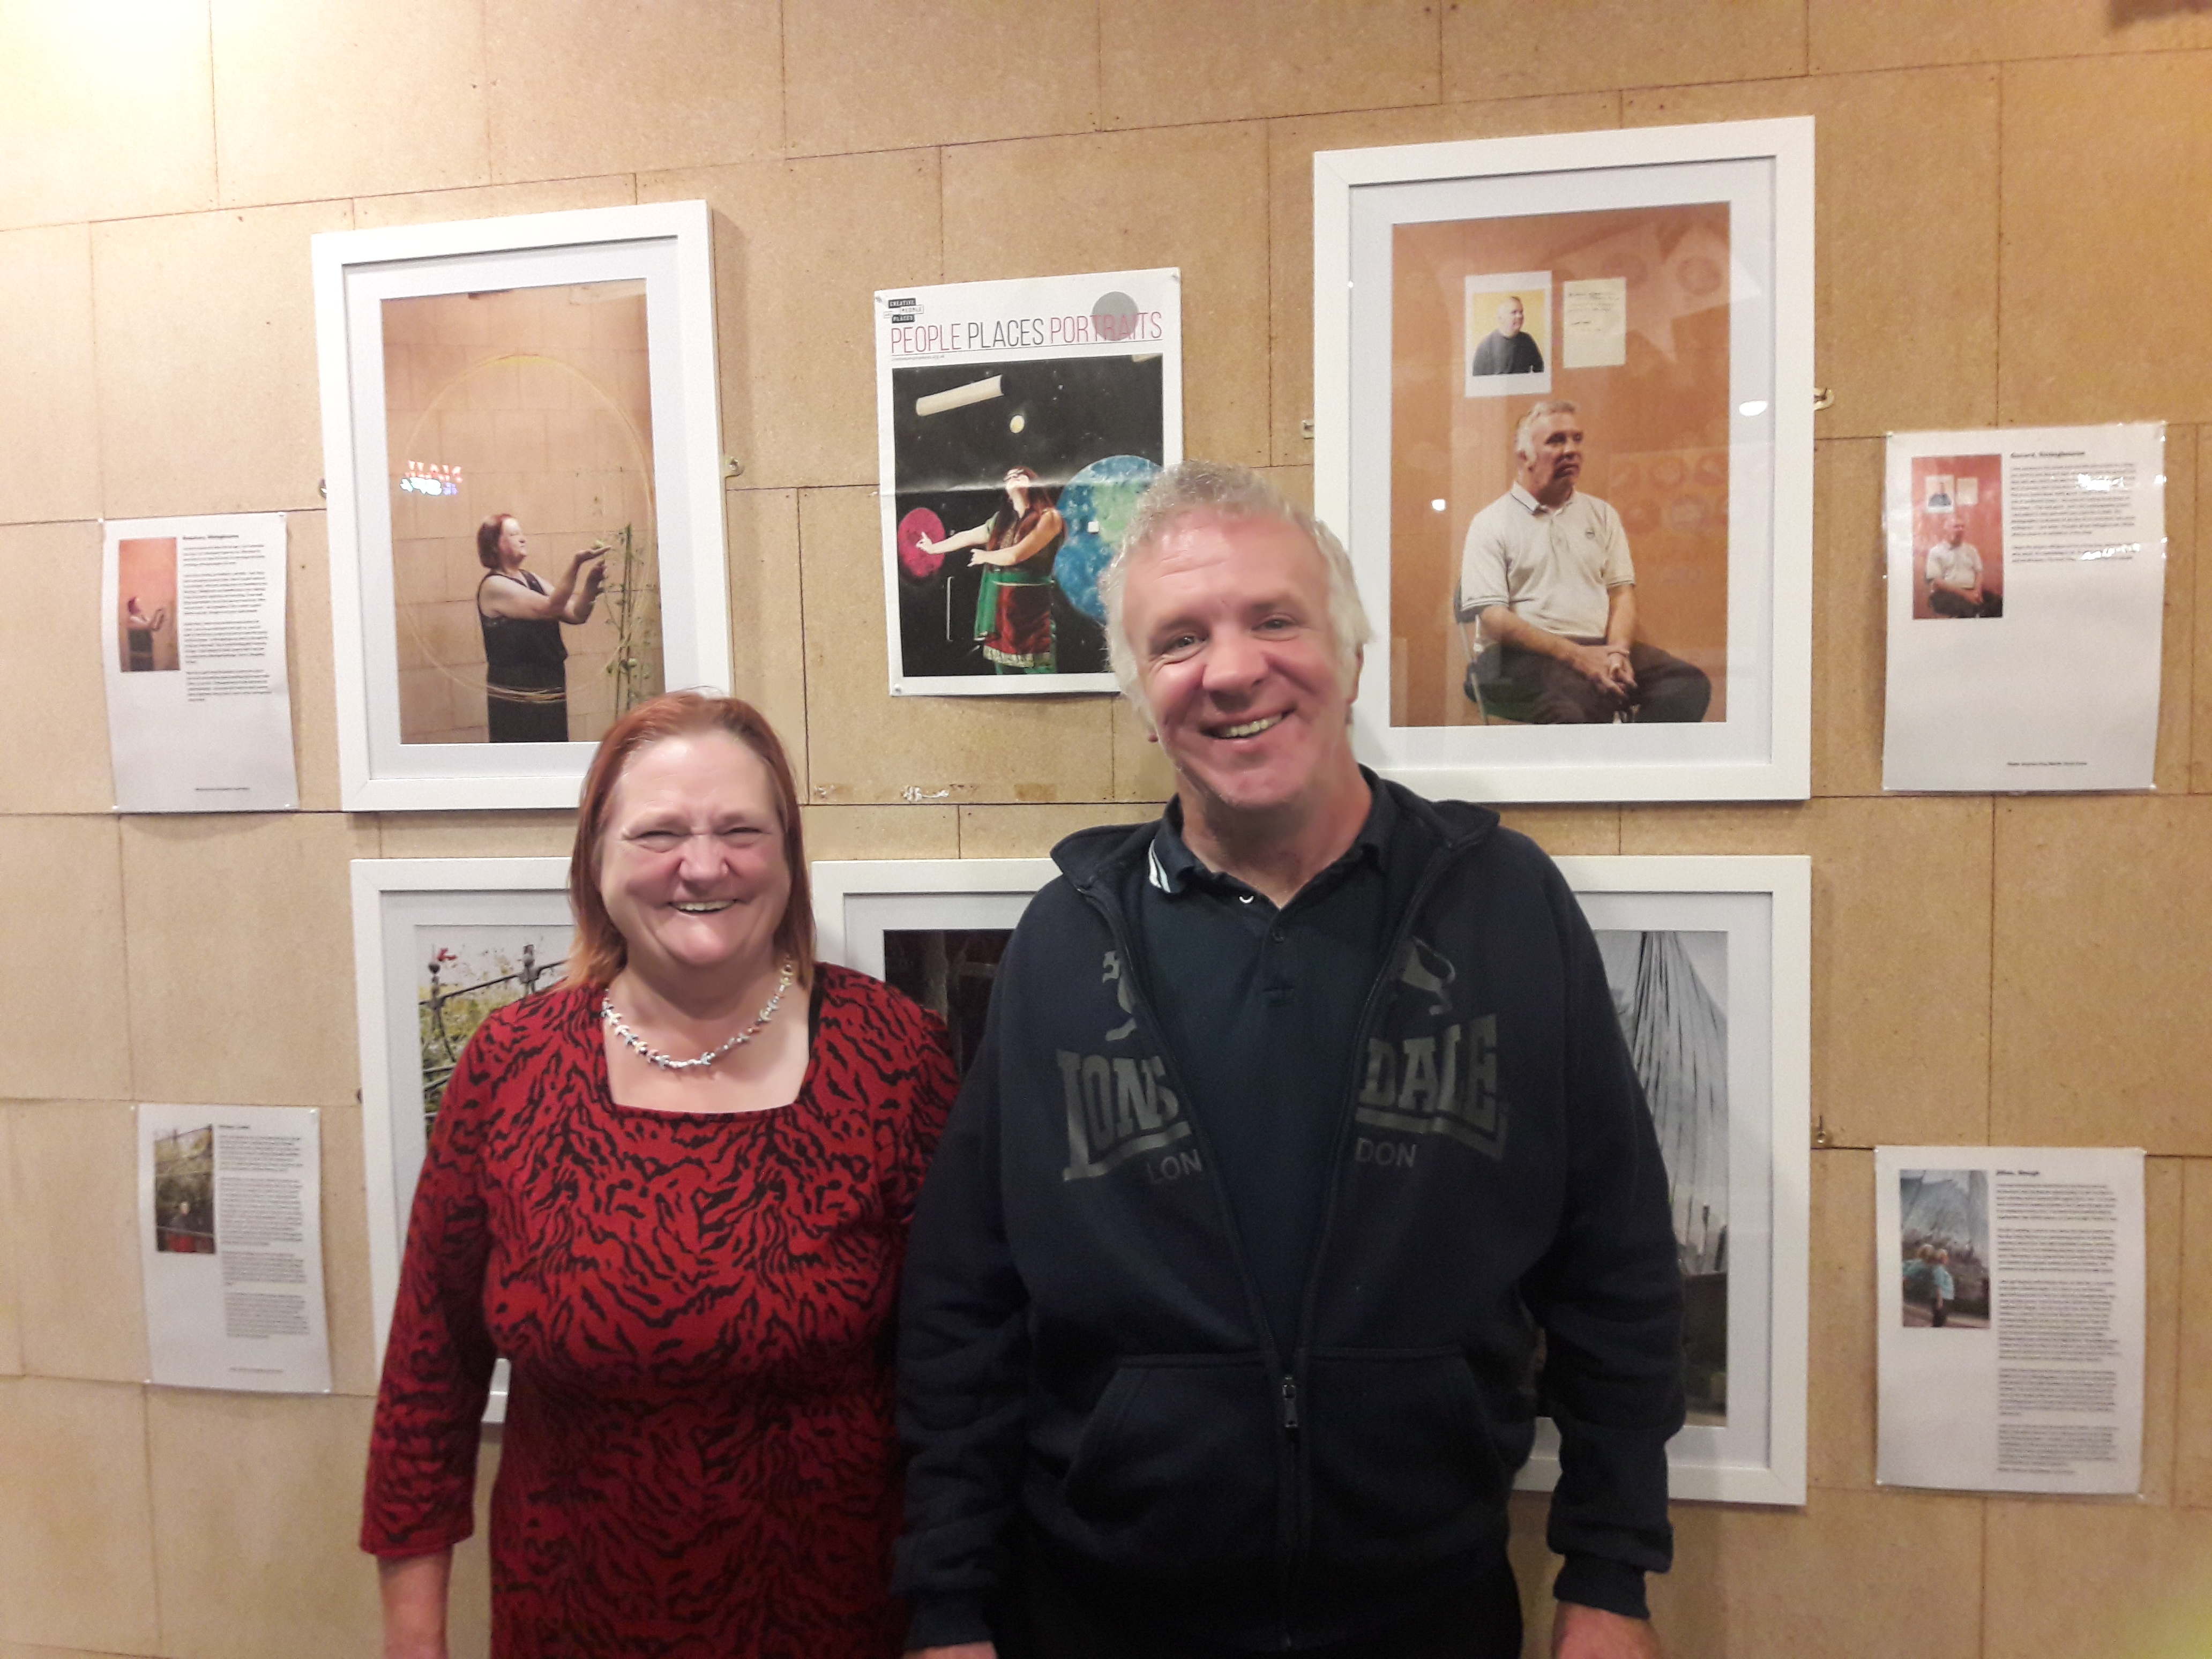 Two people stand in front of an exhibition which contains portraits of them.